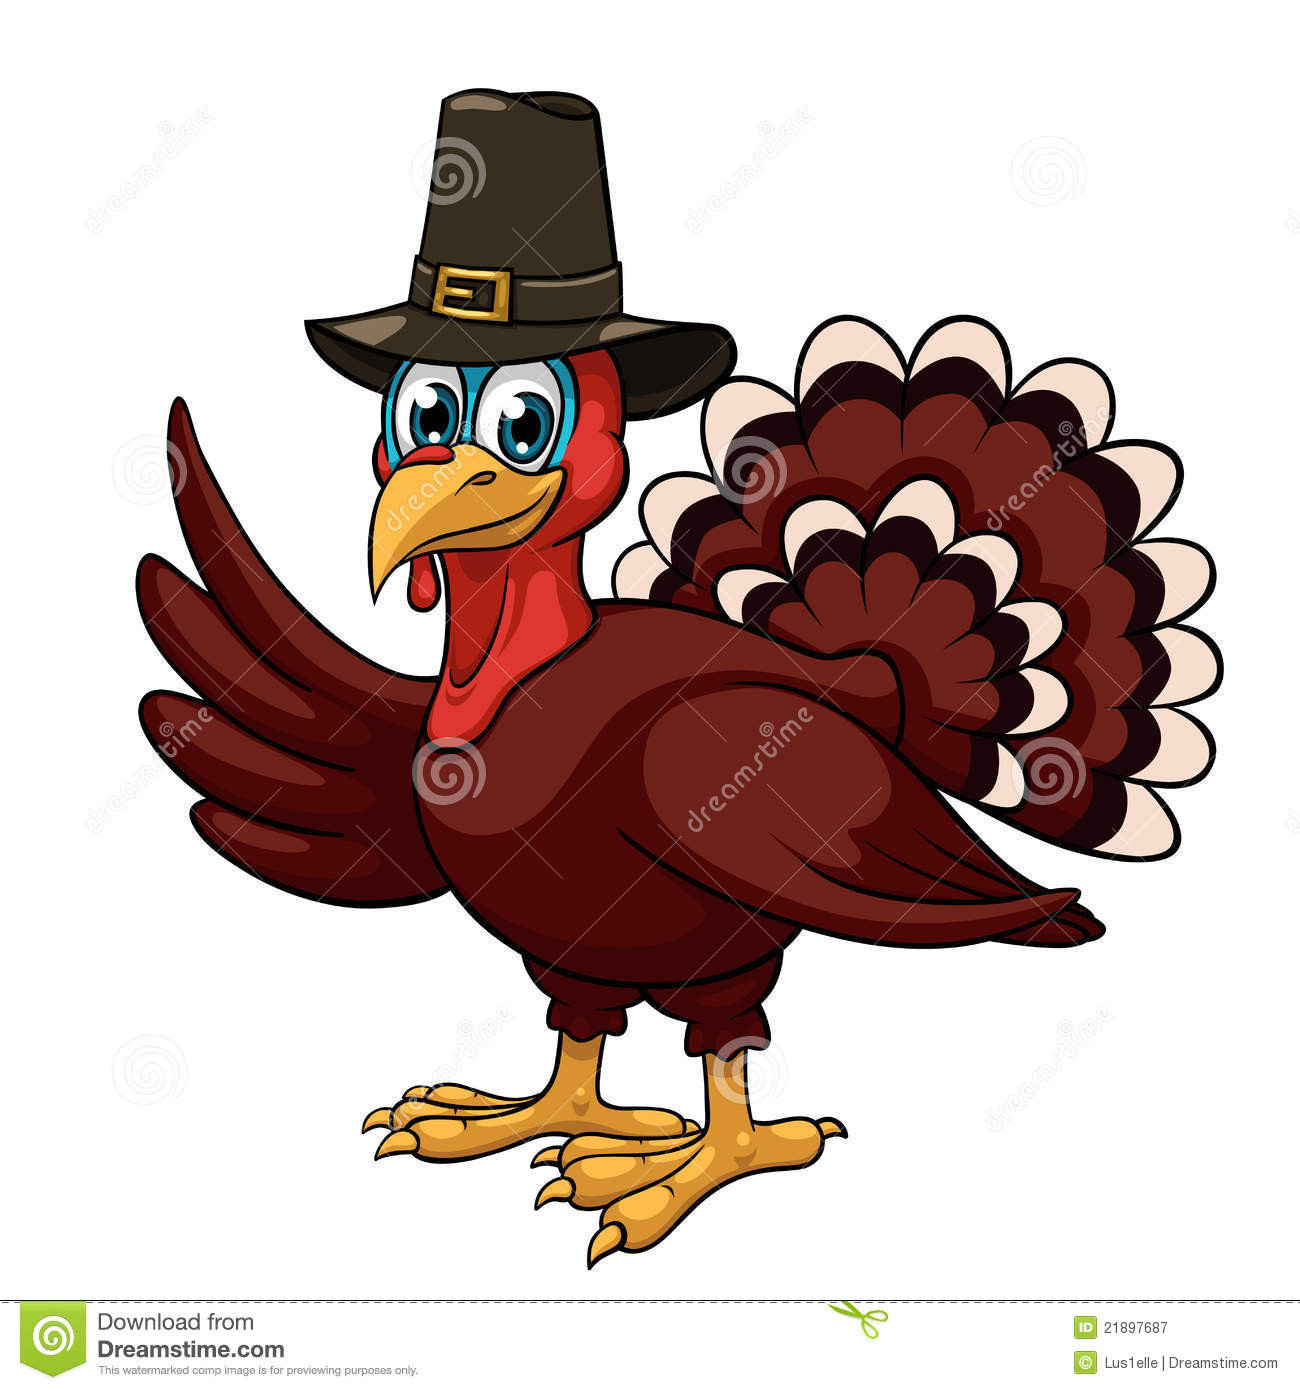 Pictures Of Turkey For Thanksgiving
 Thanksgiving Turkey Royalty Free Stock graphy Image